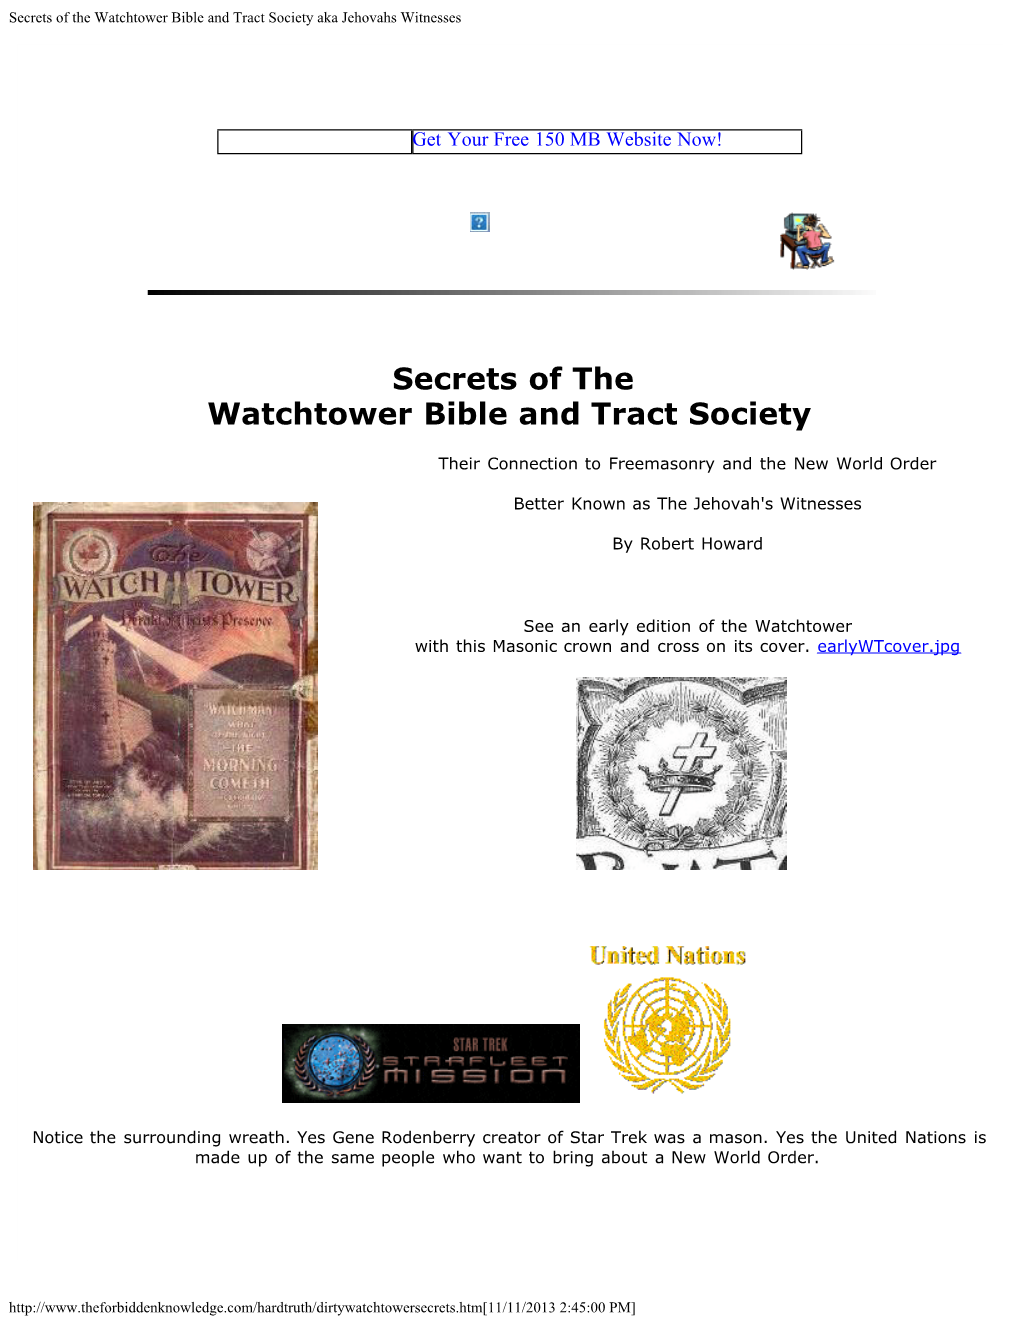 Secrets of the Watchtower Bible and Tract Society Aka Jehovahs Witnesses